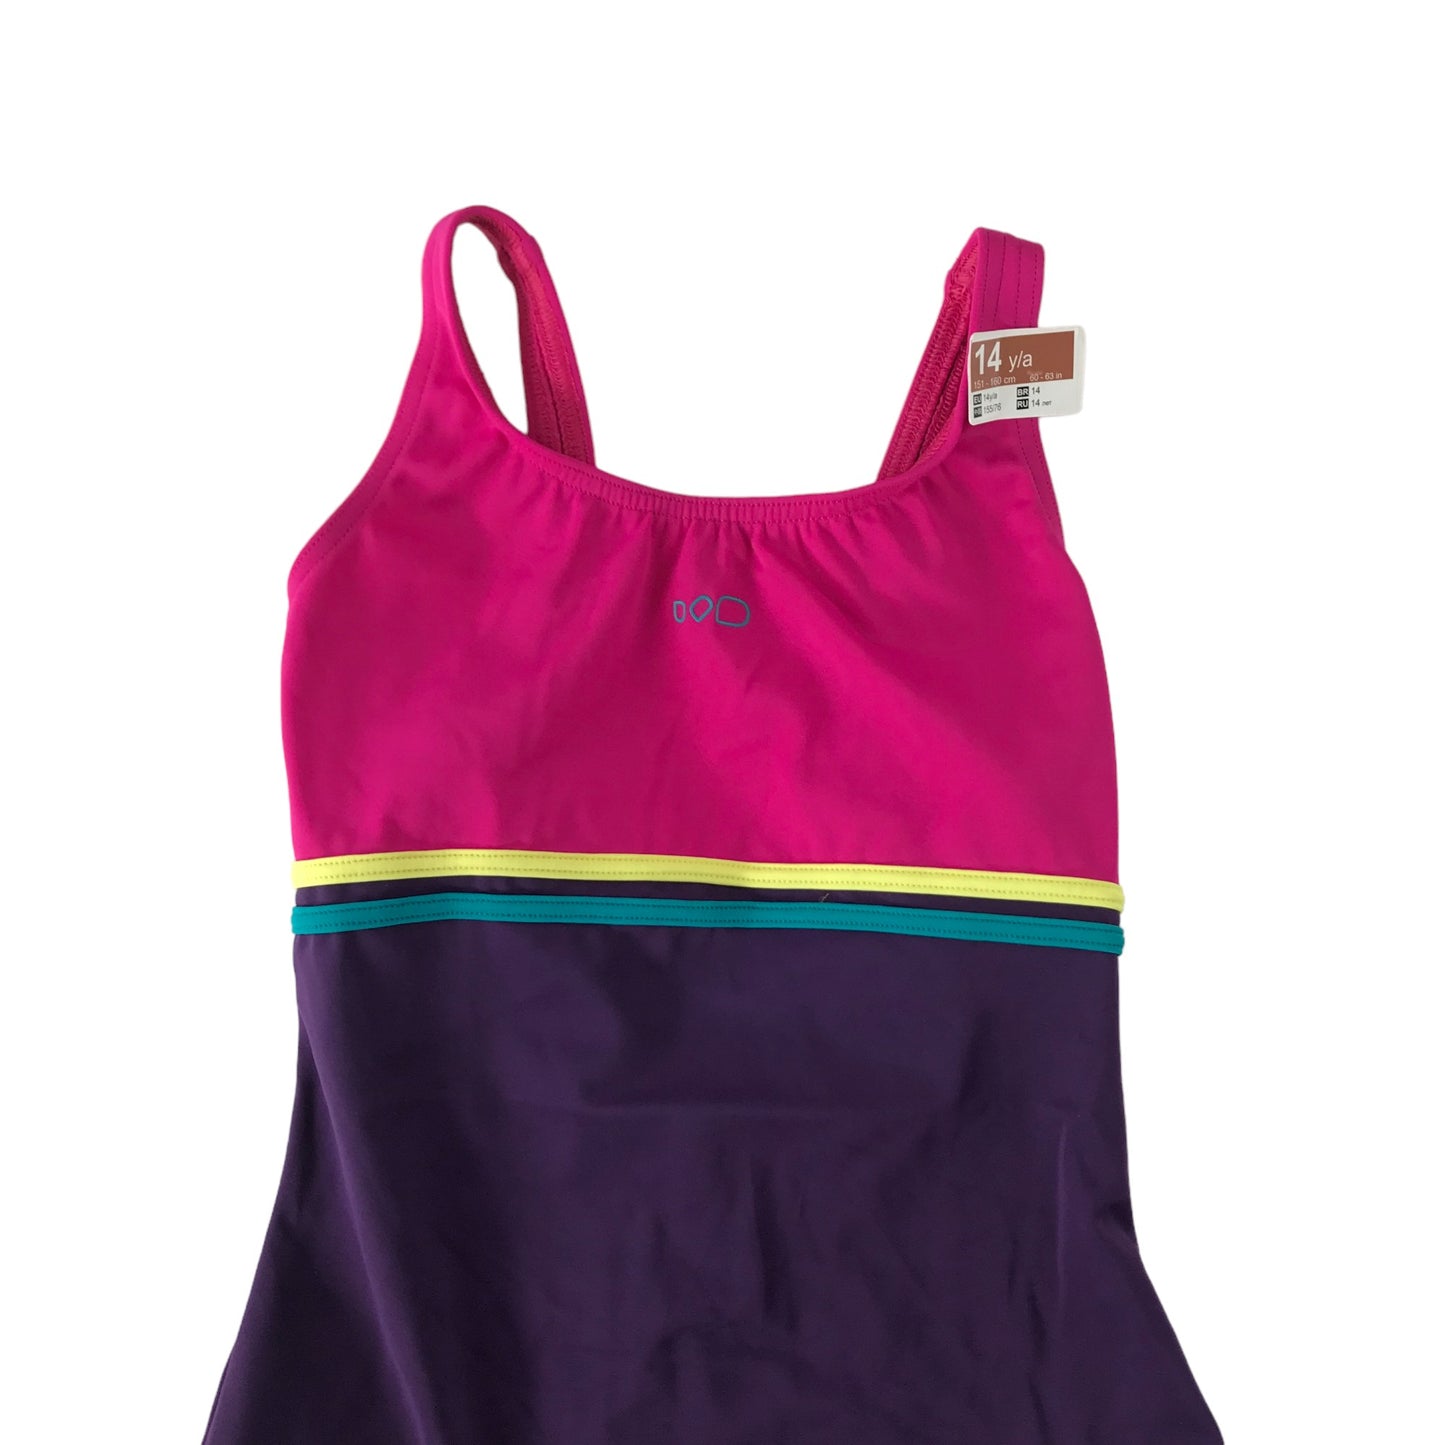 Decathlon Nabaiji Swimsuit Age 11-12 Pink and Purple One Piece Cossie